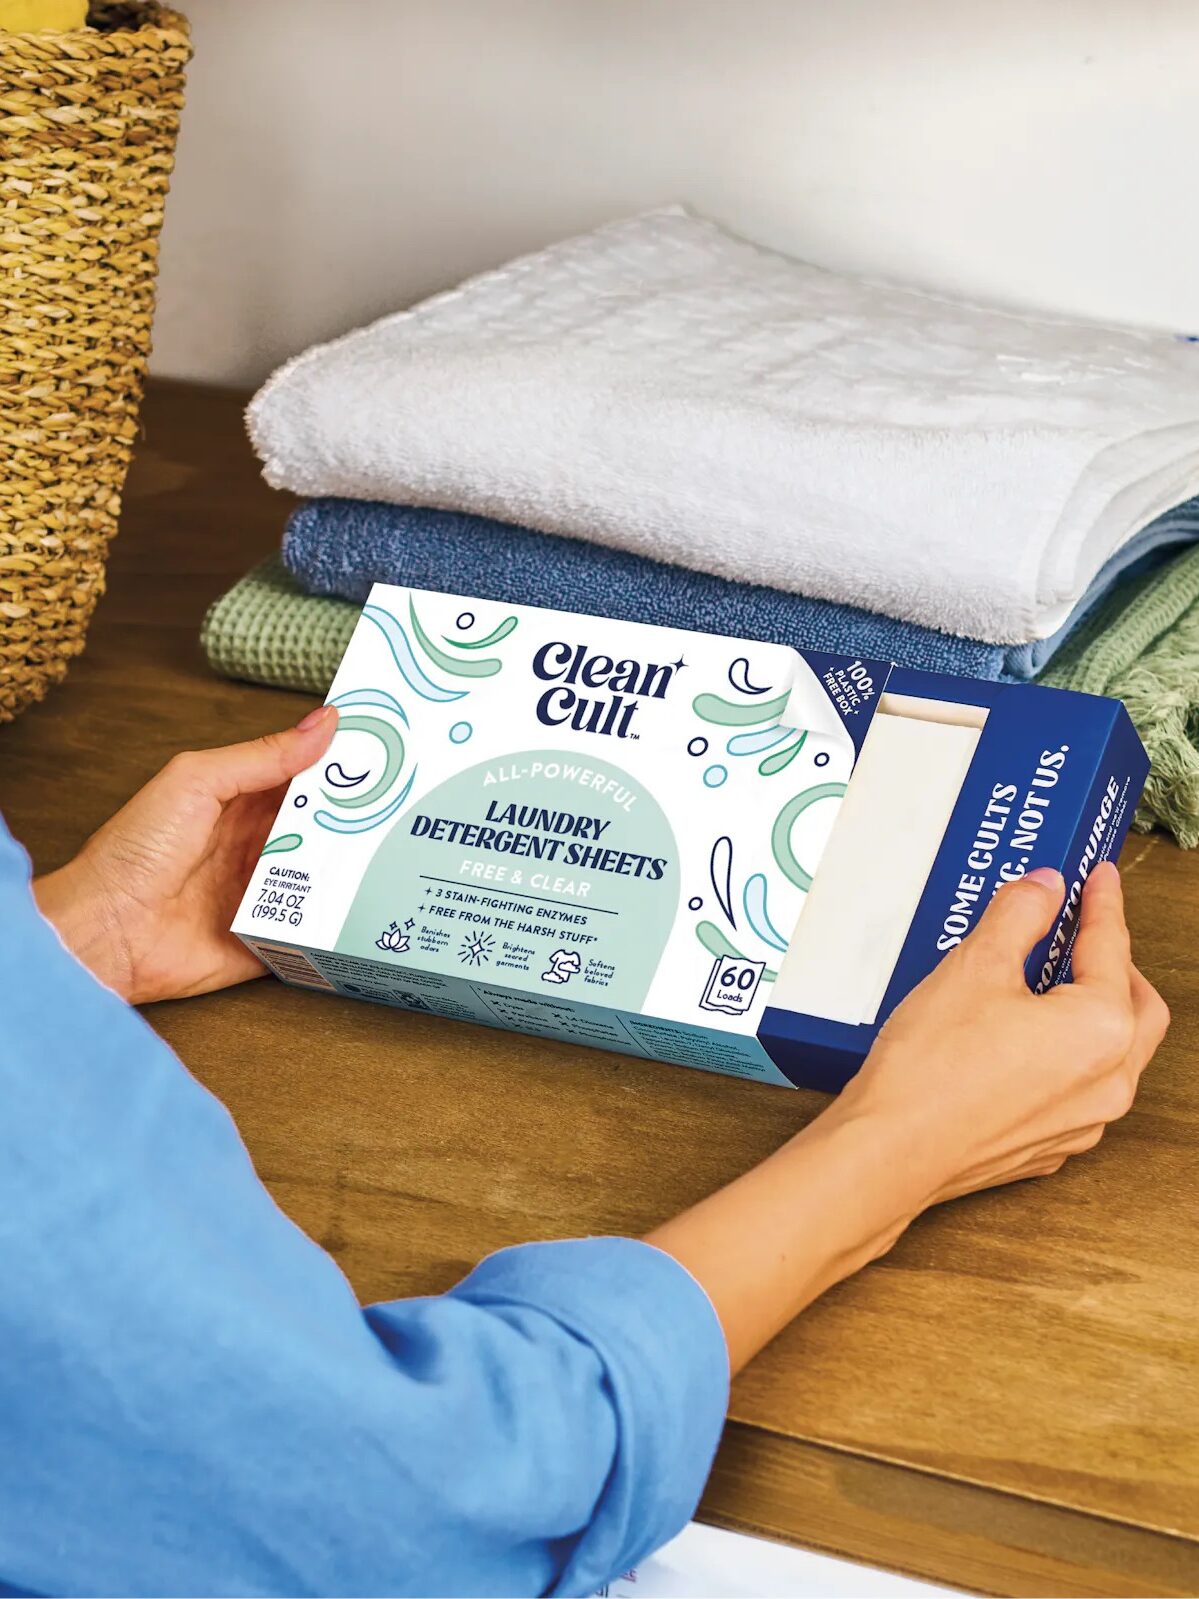 A person holding a box of cleancult laundry detergent sheets next to a pile of folded towels.